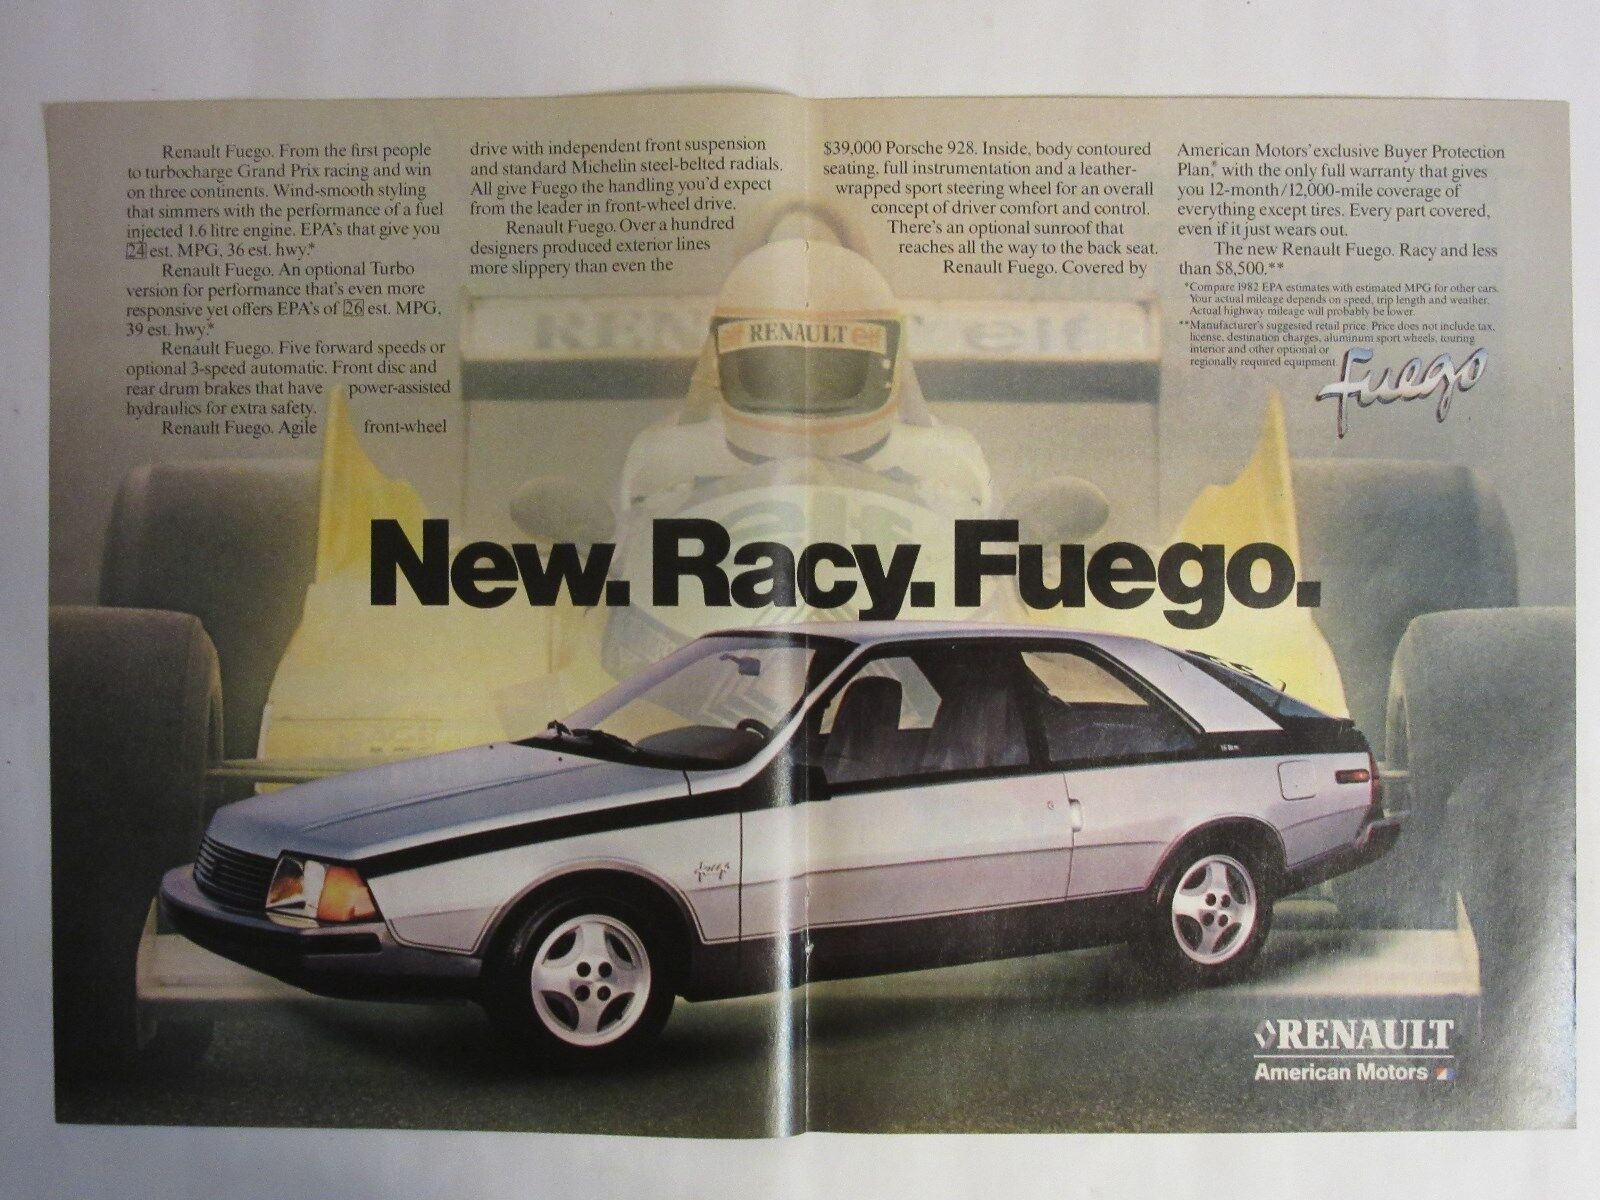 Vintage 1982 Renault Fuego 2 Page Magazine Ad Great to frame AMC Centerfold